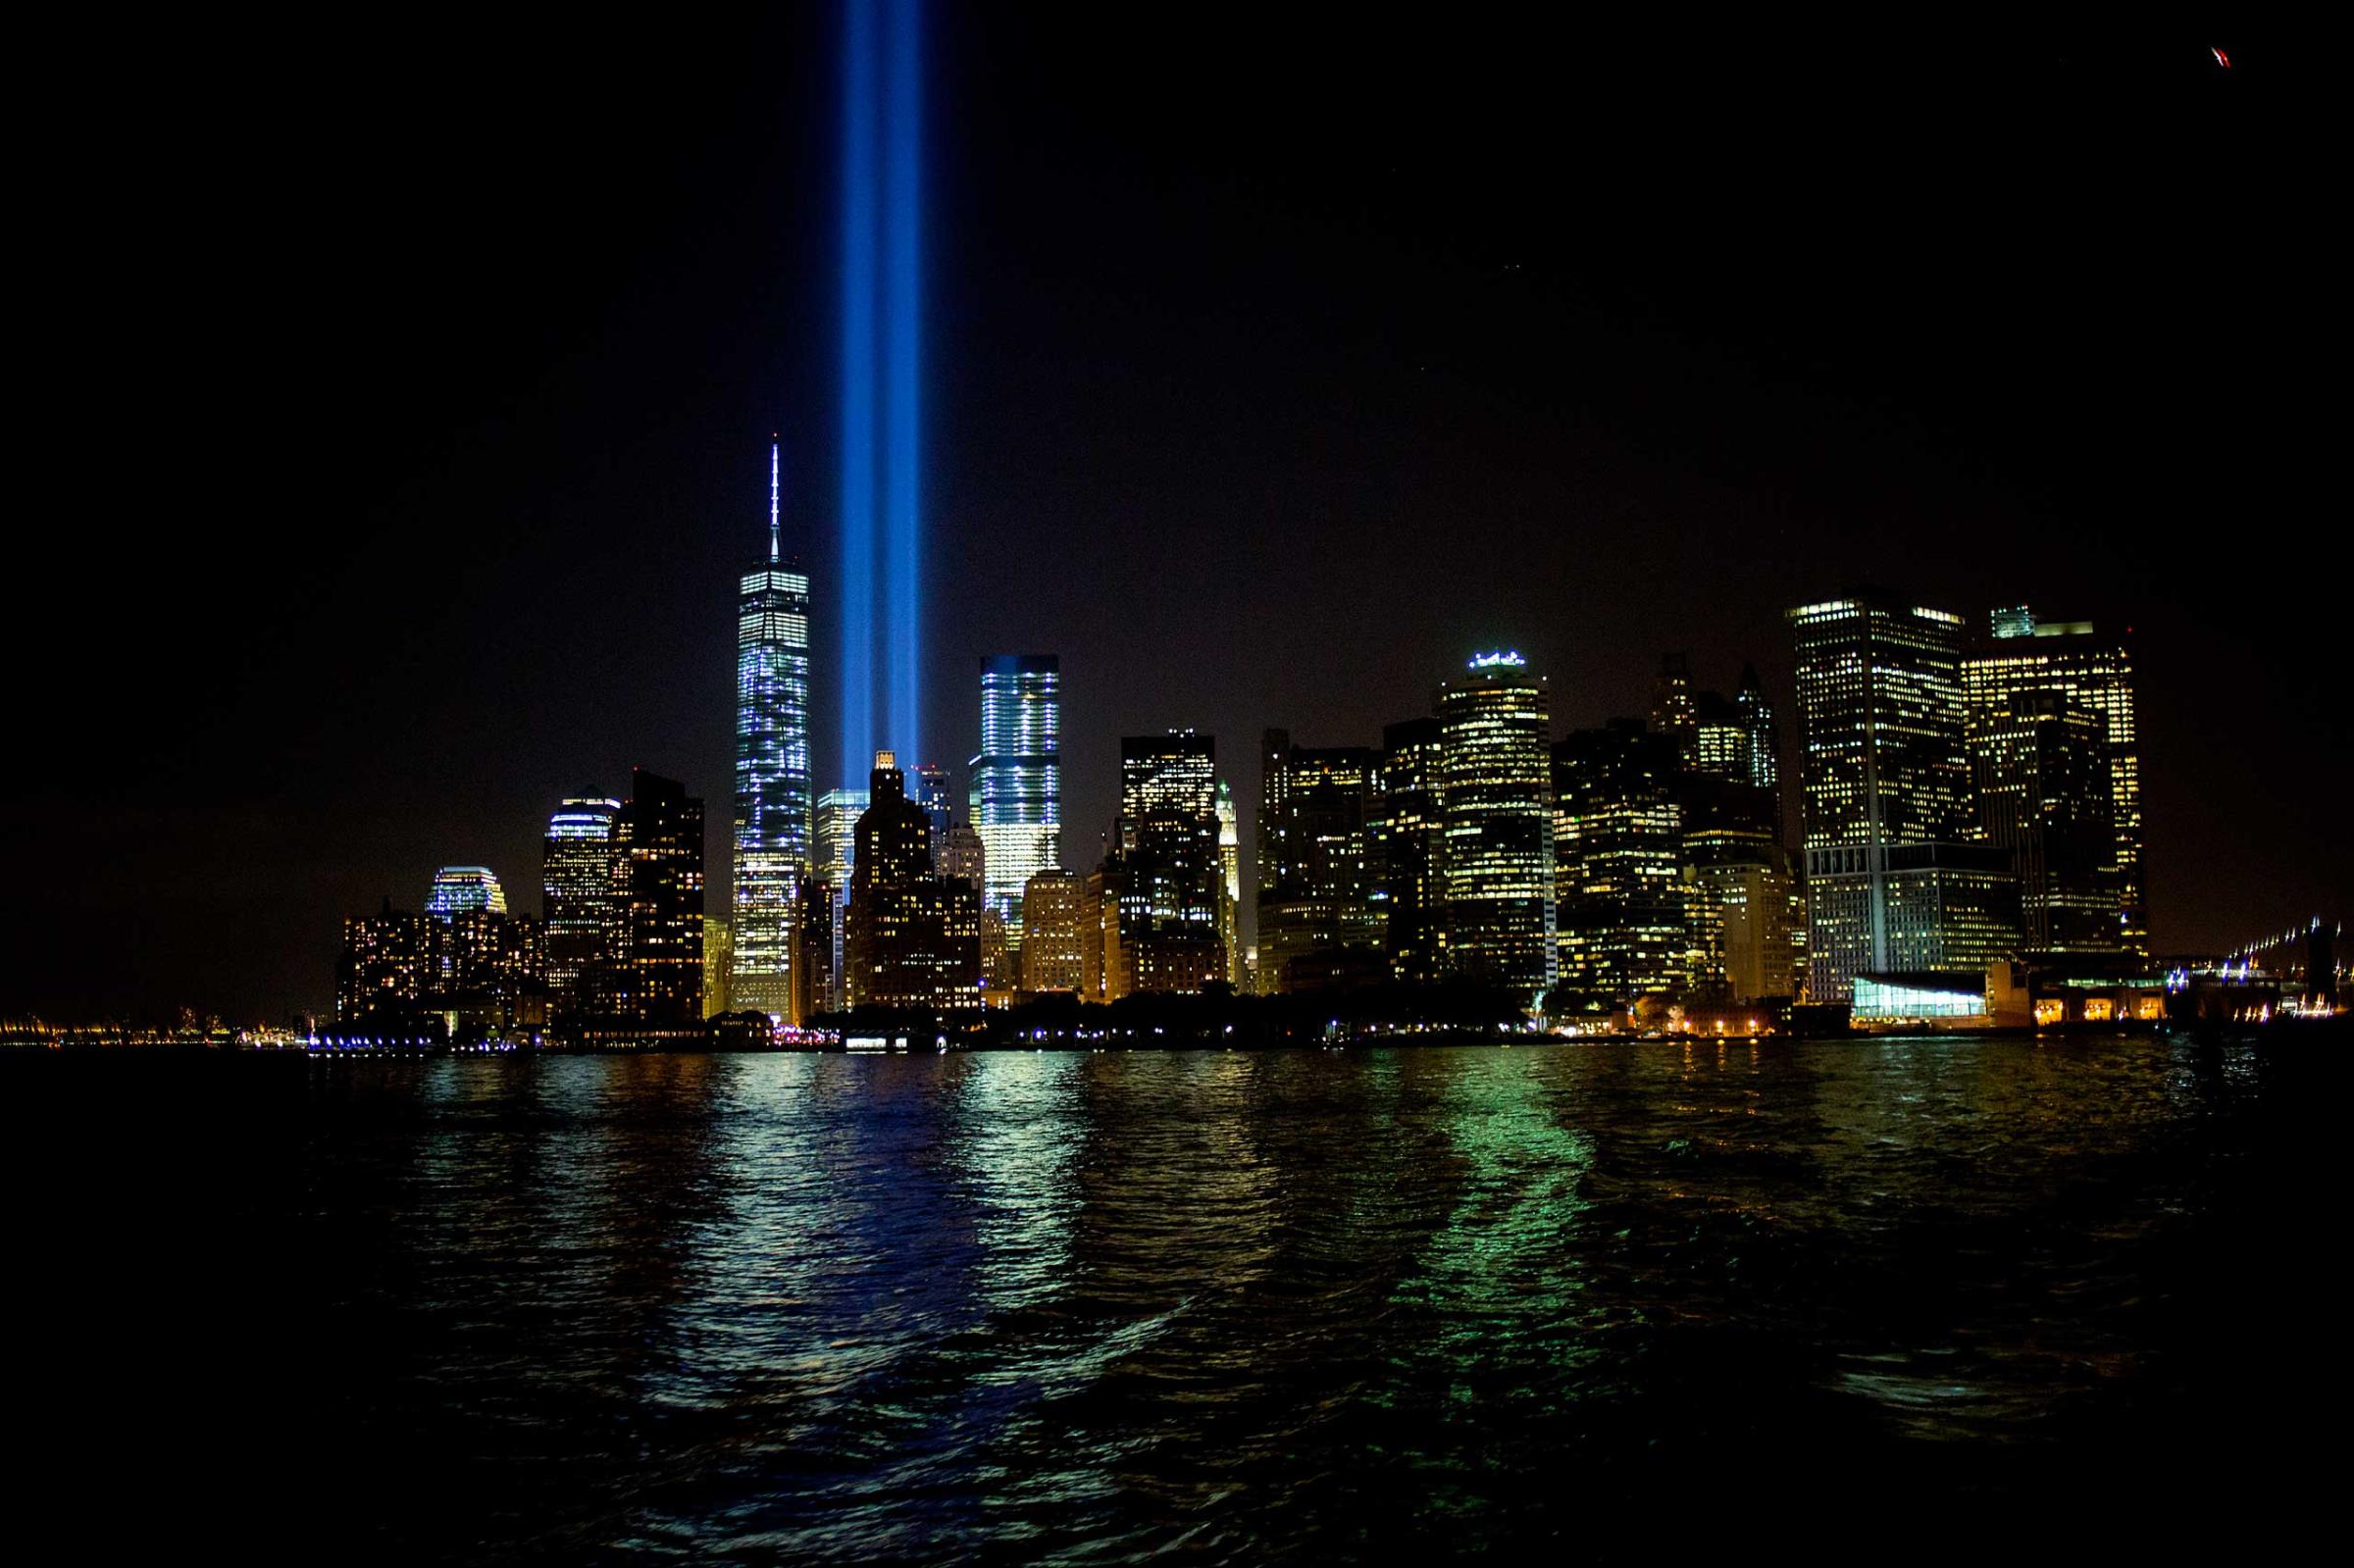 The "Tribute in Lights" is seen Sept. 11, 2014 marking the 13th anniversary of the September 11th terrorist attacks.